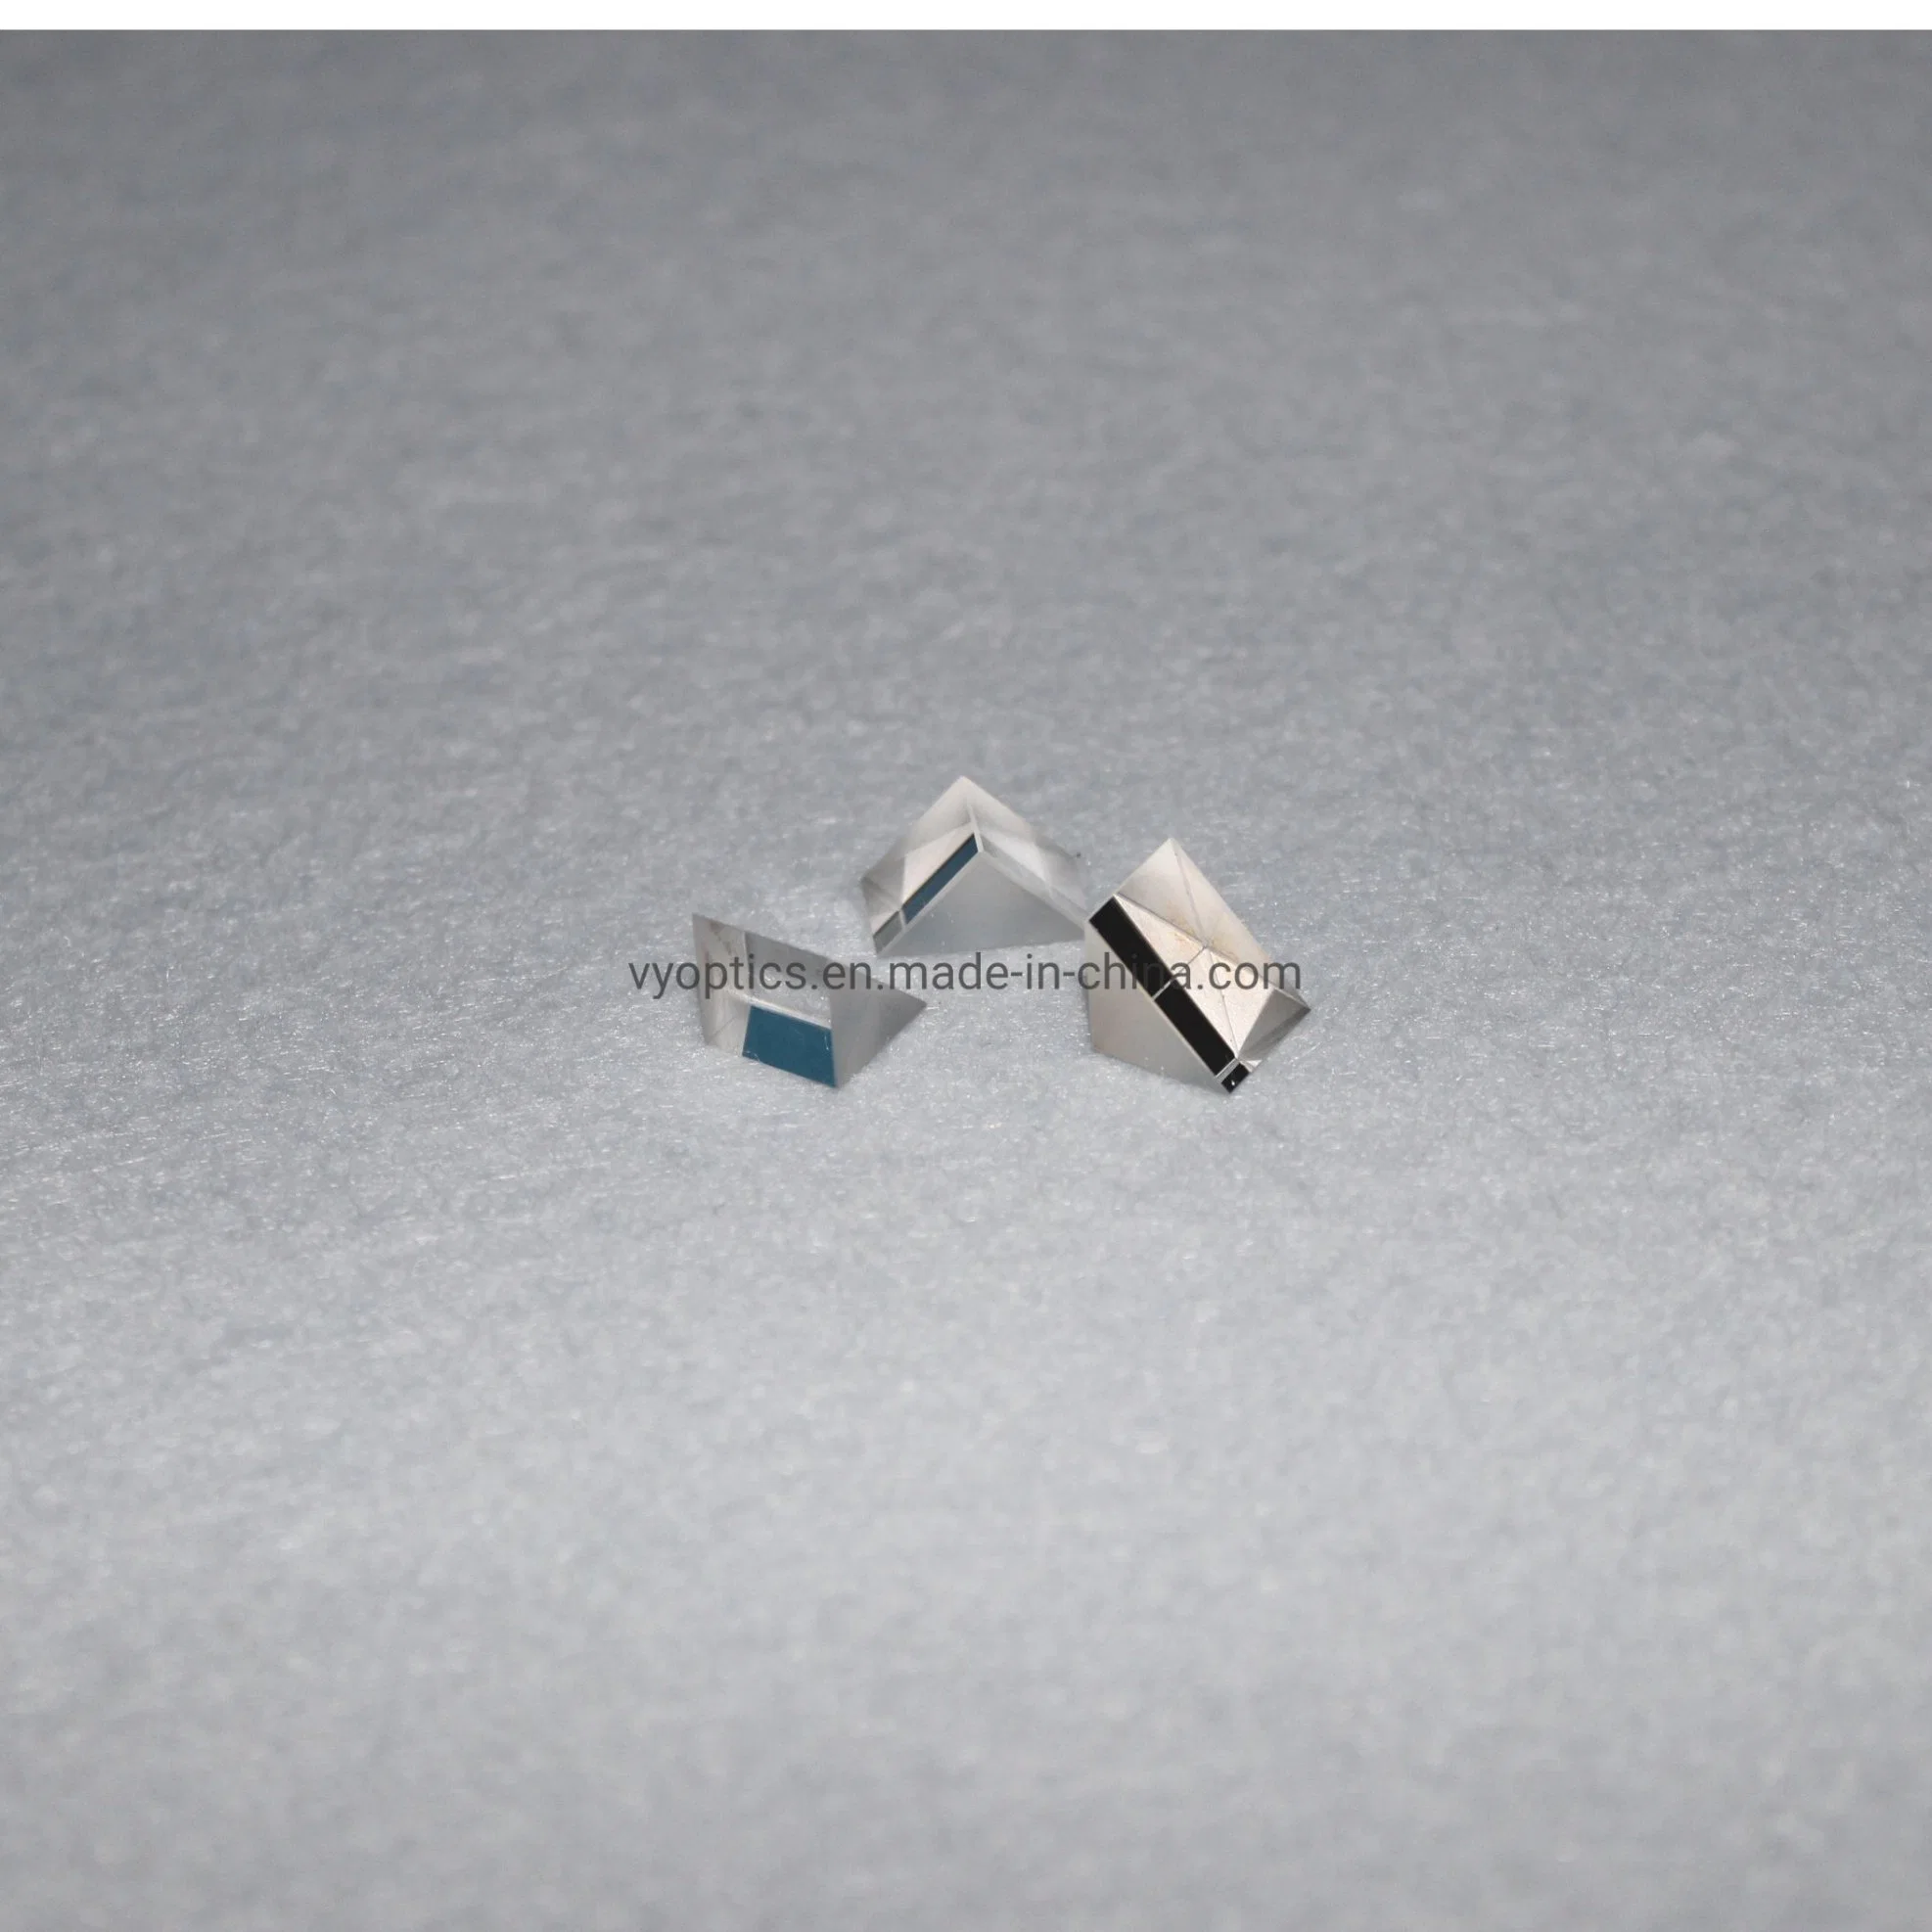 Best Quality High Polished Bk7/Fused Silica/Sapphire/CaF2 Glass Optical Right Angle Prism